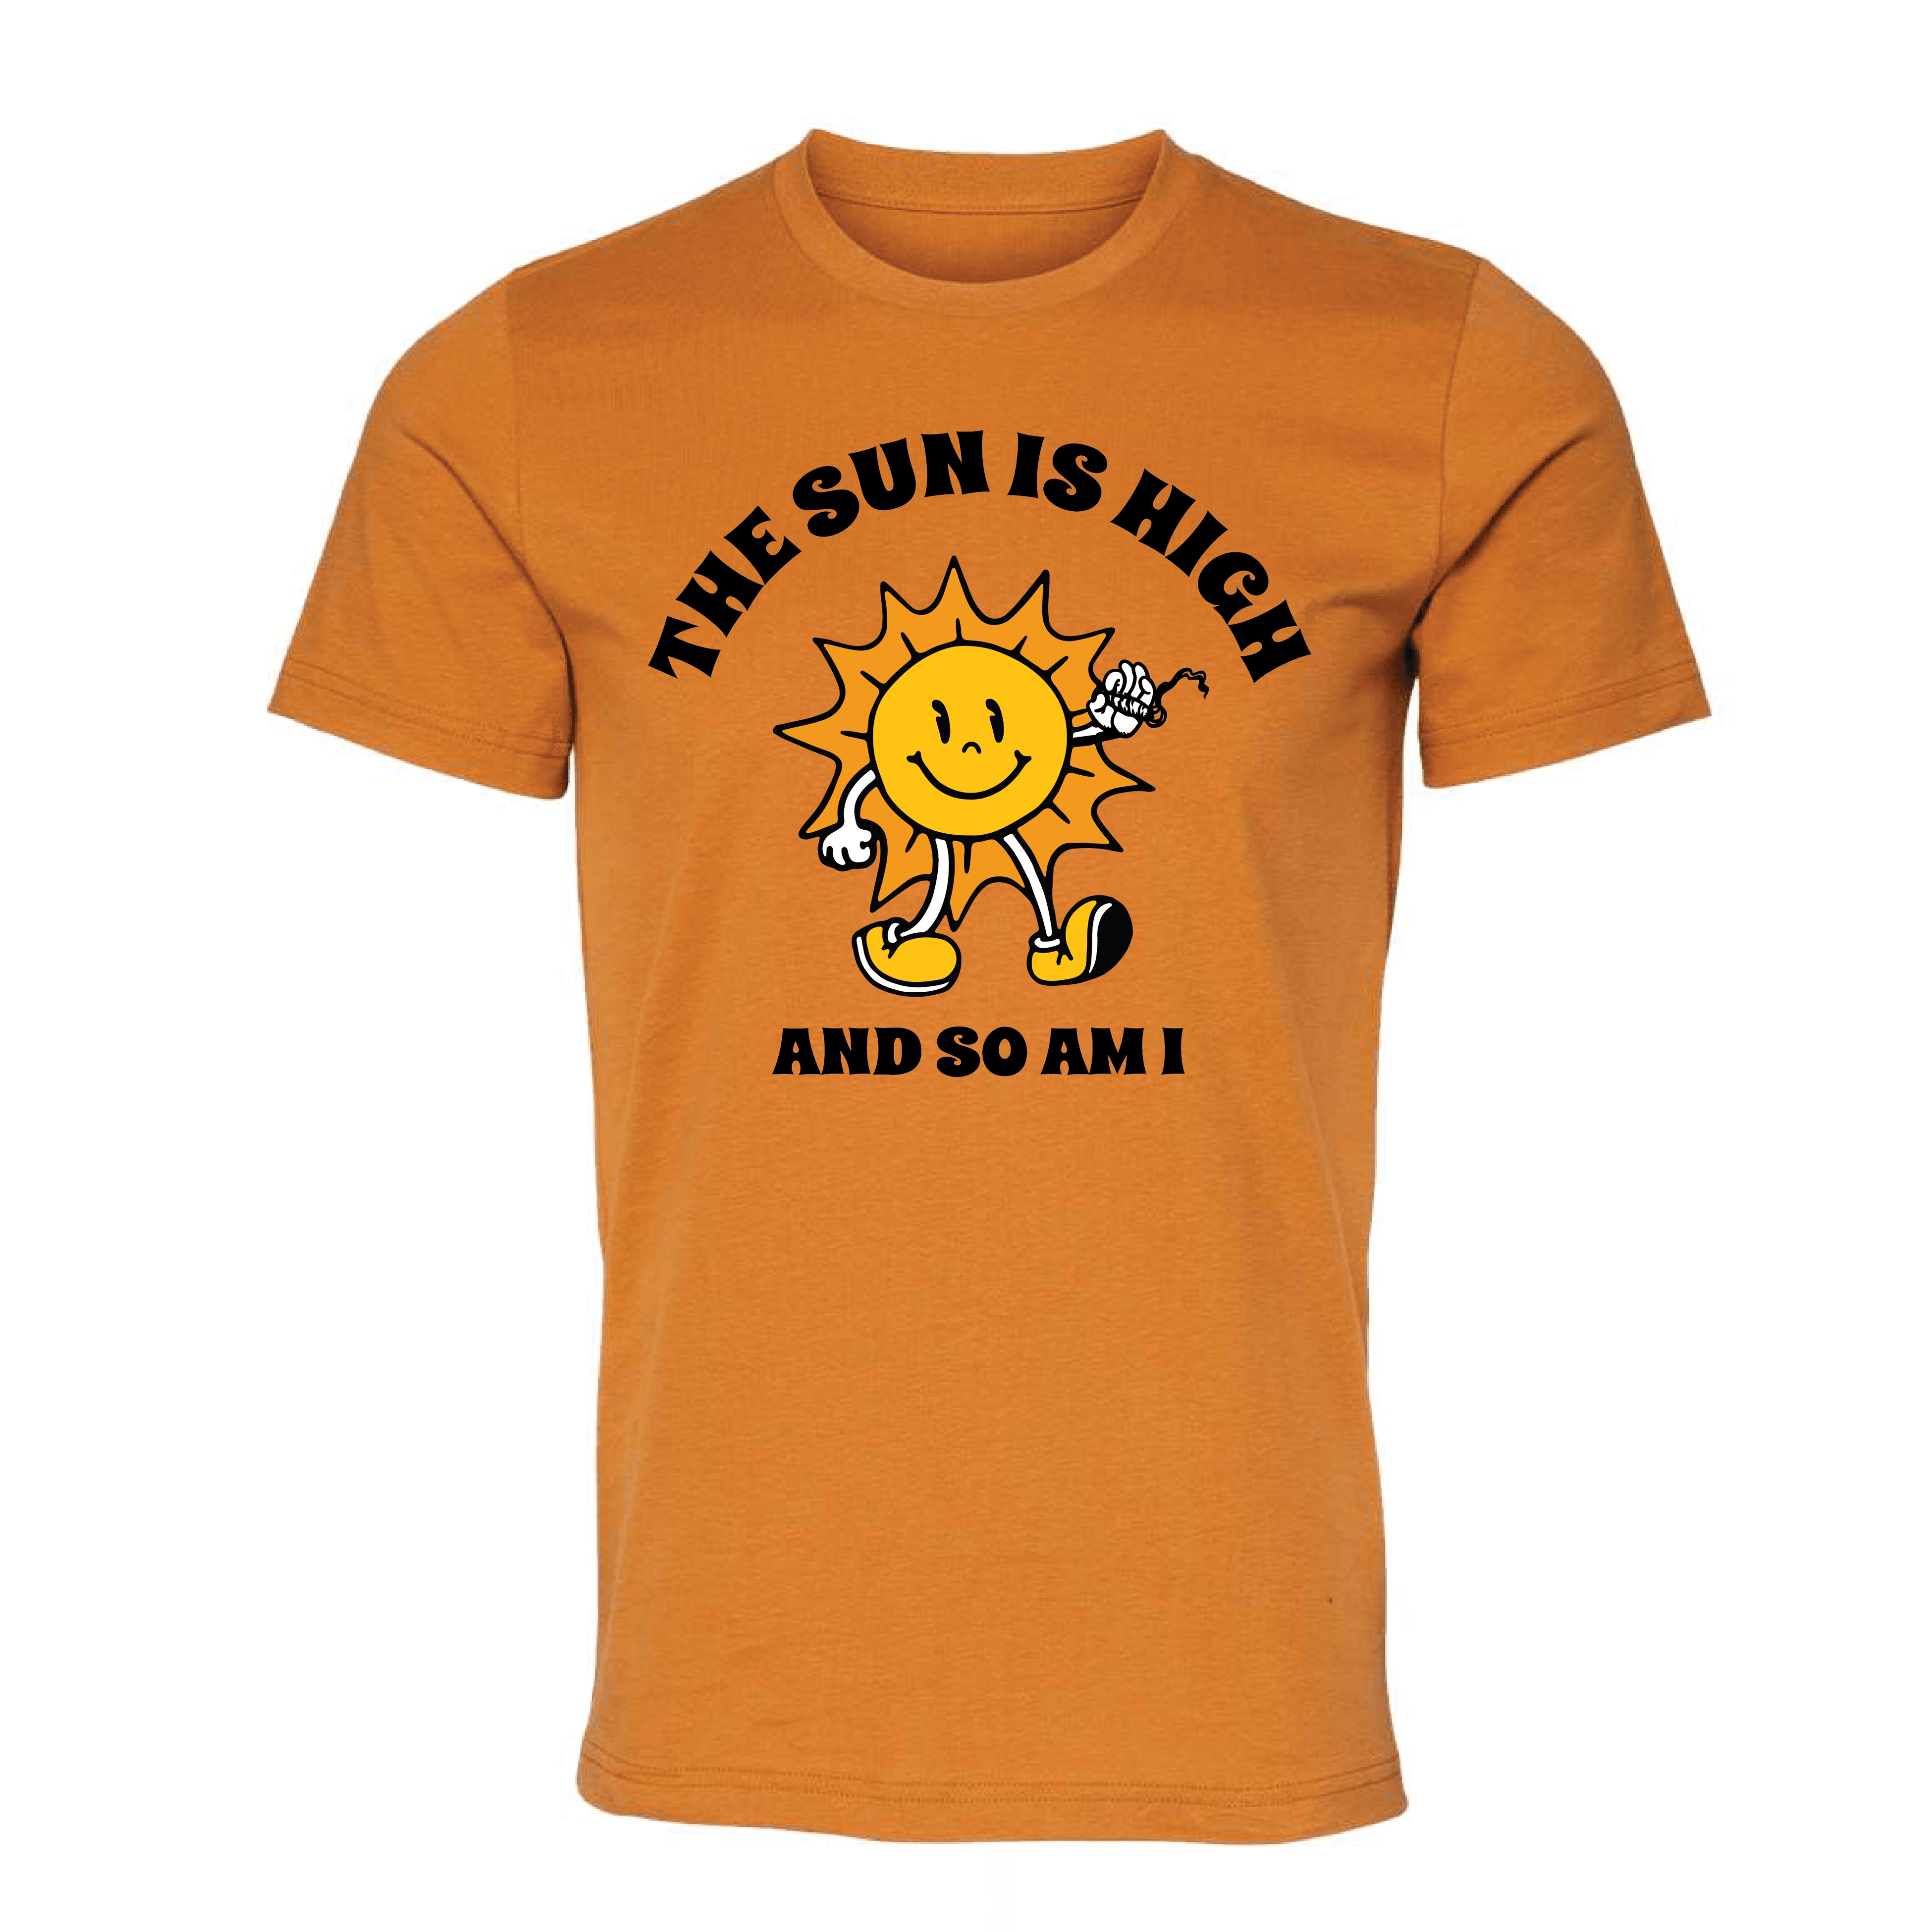 The Sun is High T-Shirt - Ales to Trails